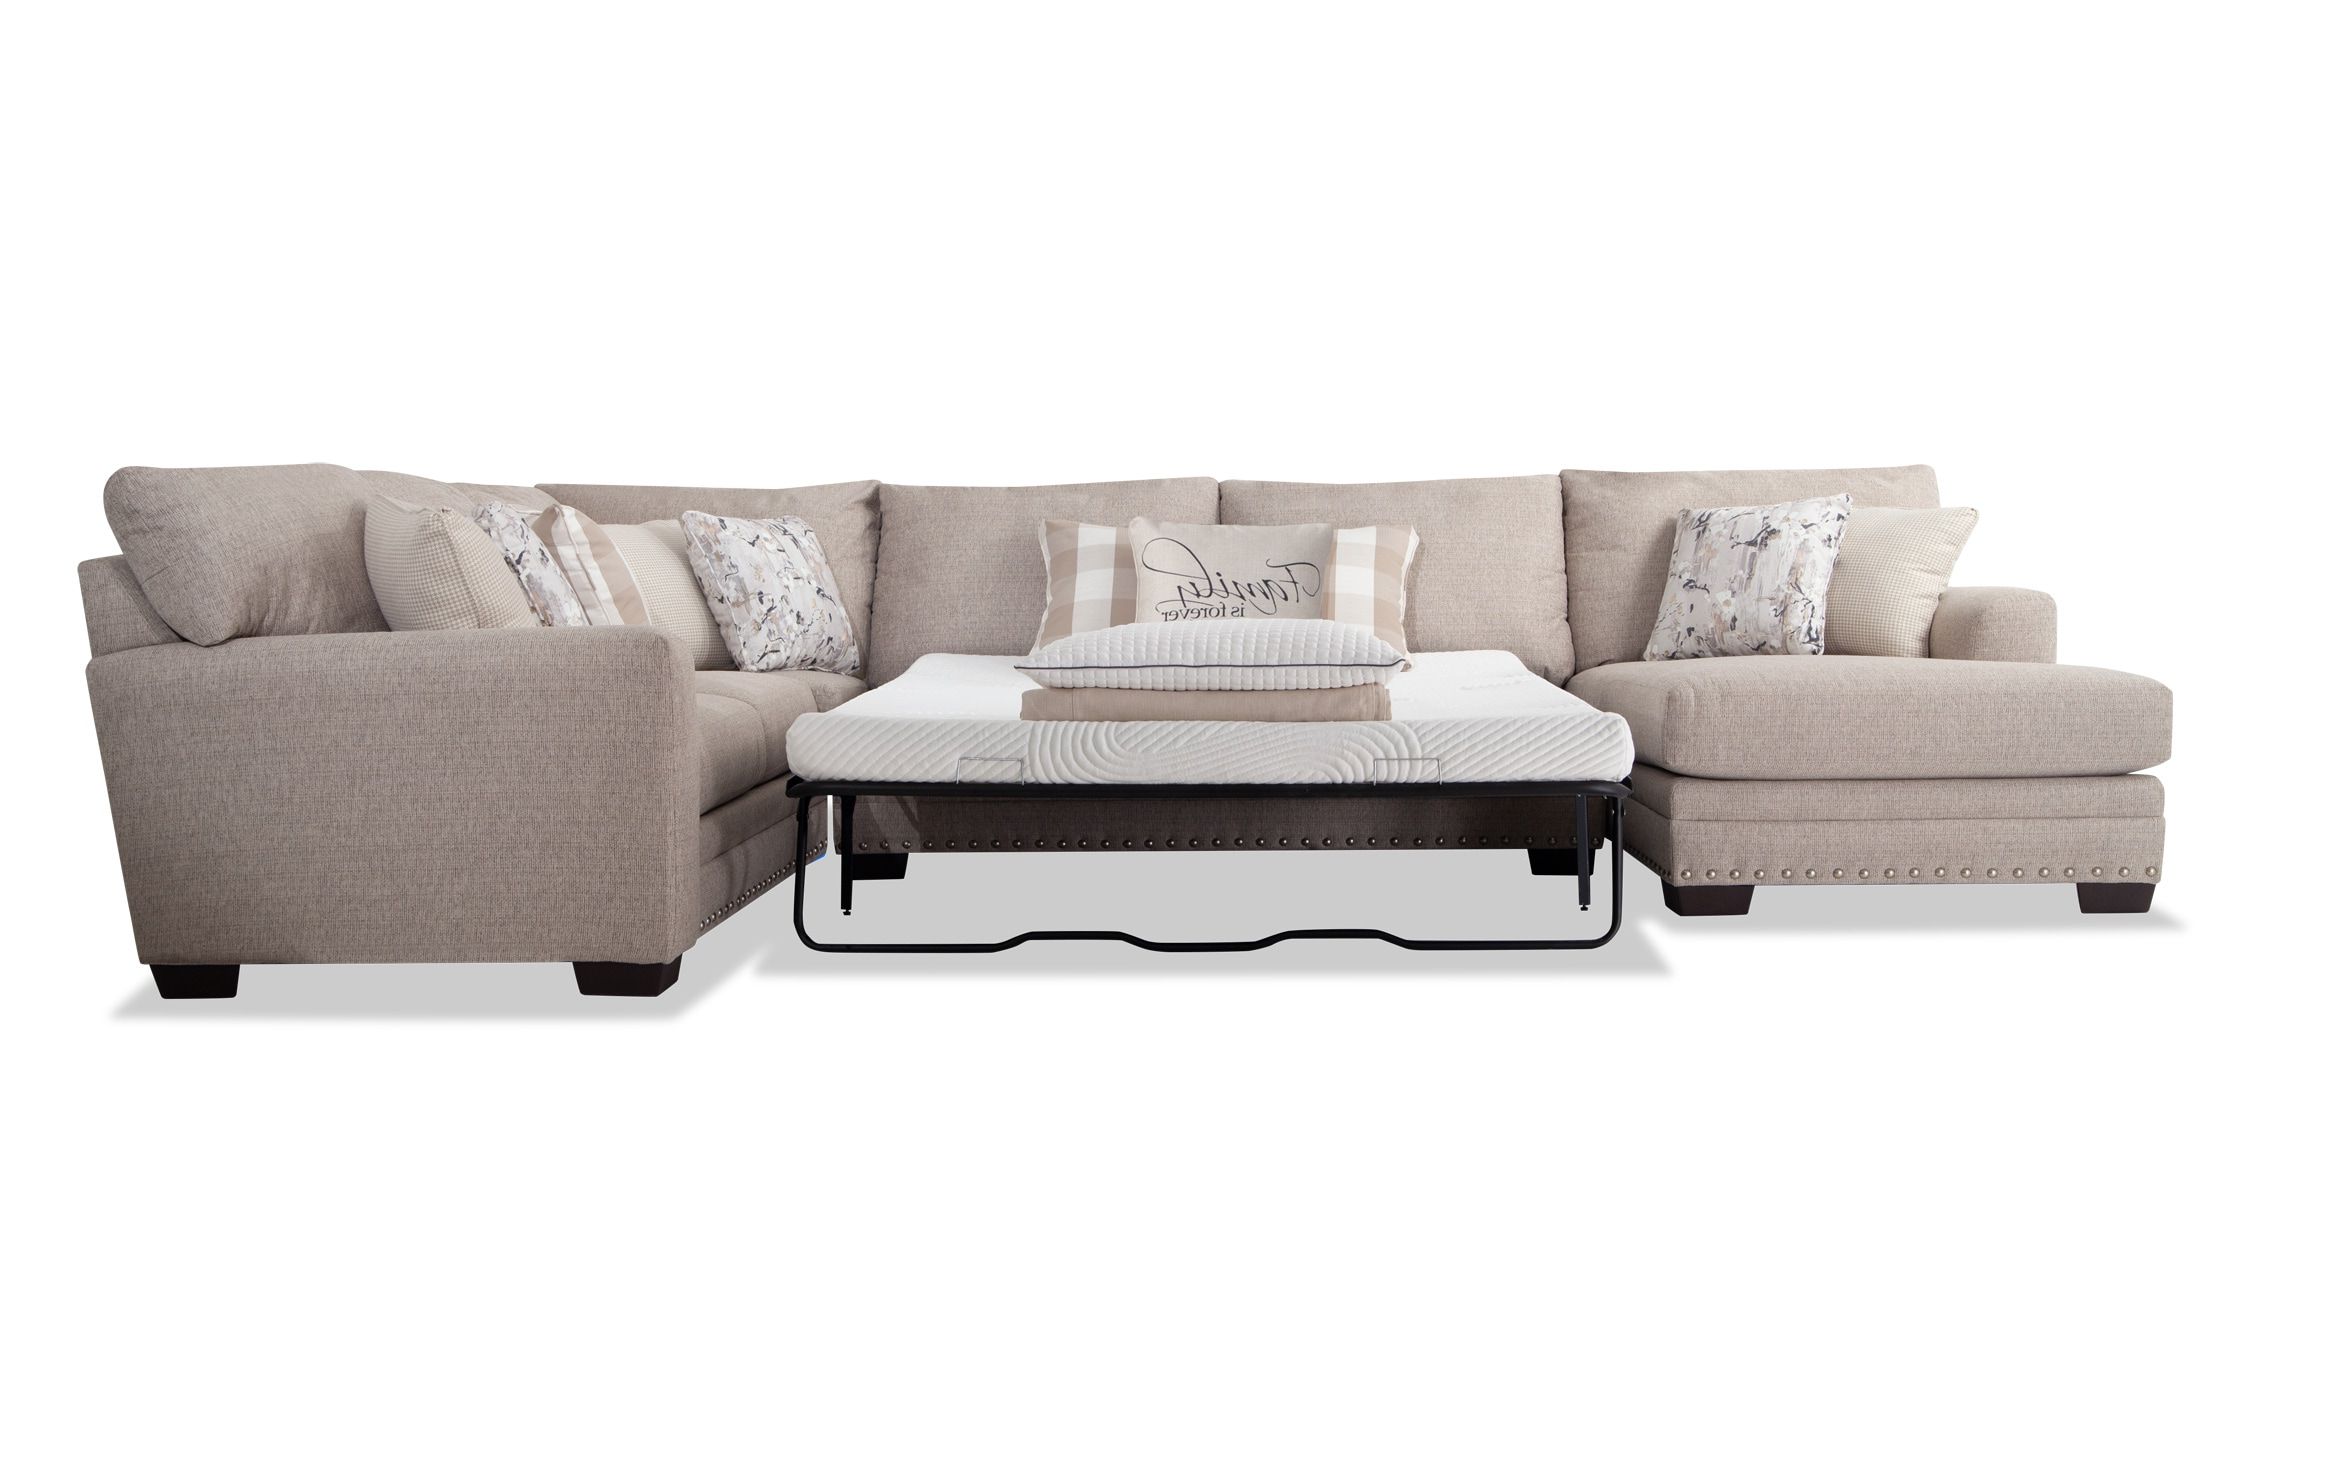 Cottage Chic Beige 4 Piece Right Arm Facing Bob O Pedic Queen Sleeper  Sectional | Bob's Discount Furniture With Regard To Left Or Right Facing Sleeper Sectional Sofas (View 12 of 20)